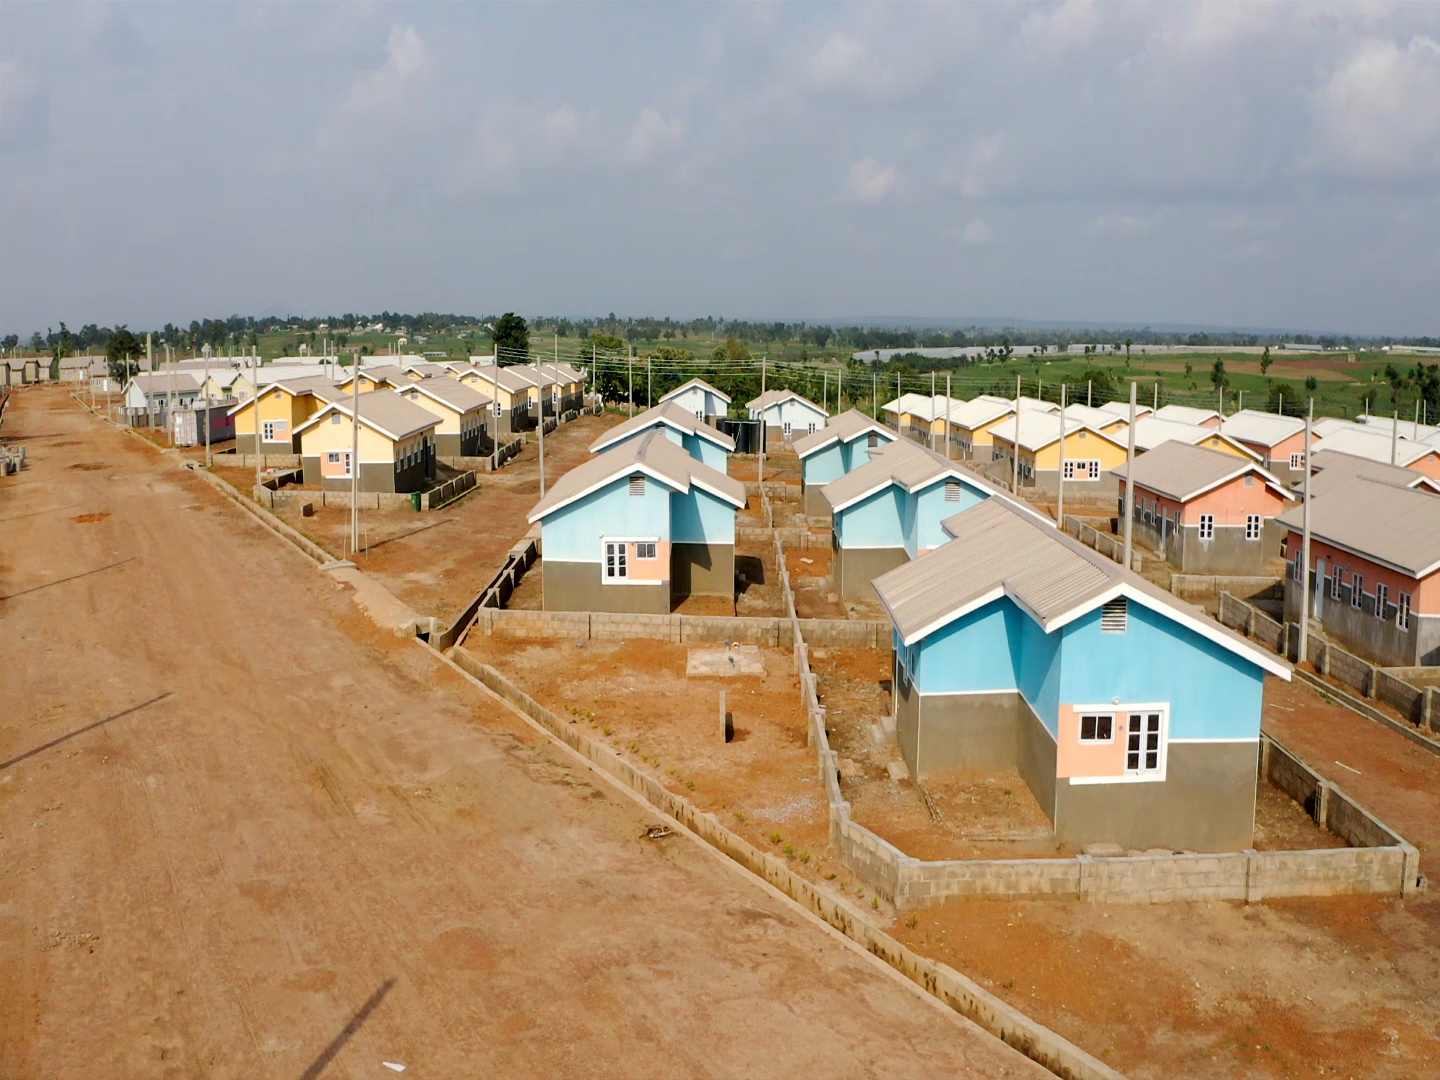 Reall in The Economist: Tackling Africa’s Housing Boom